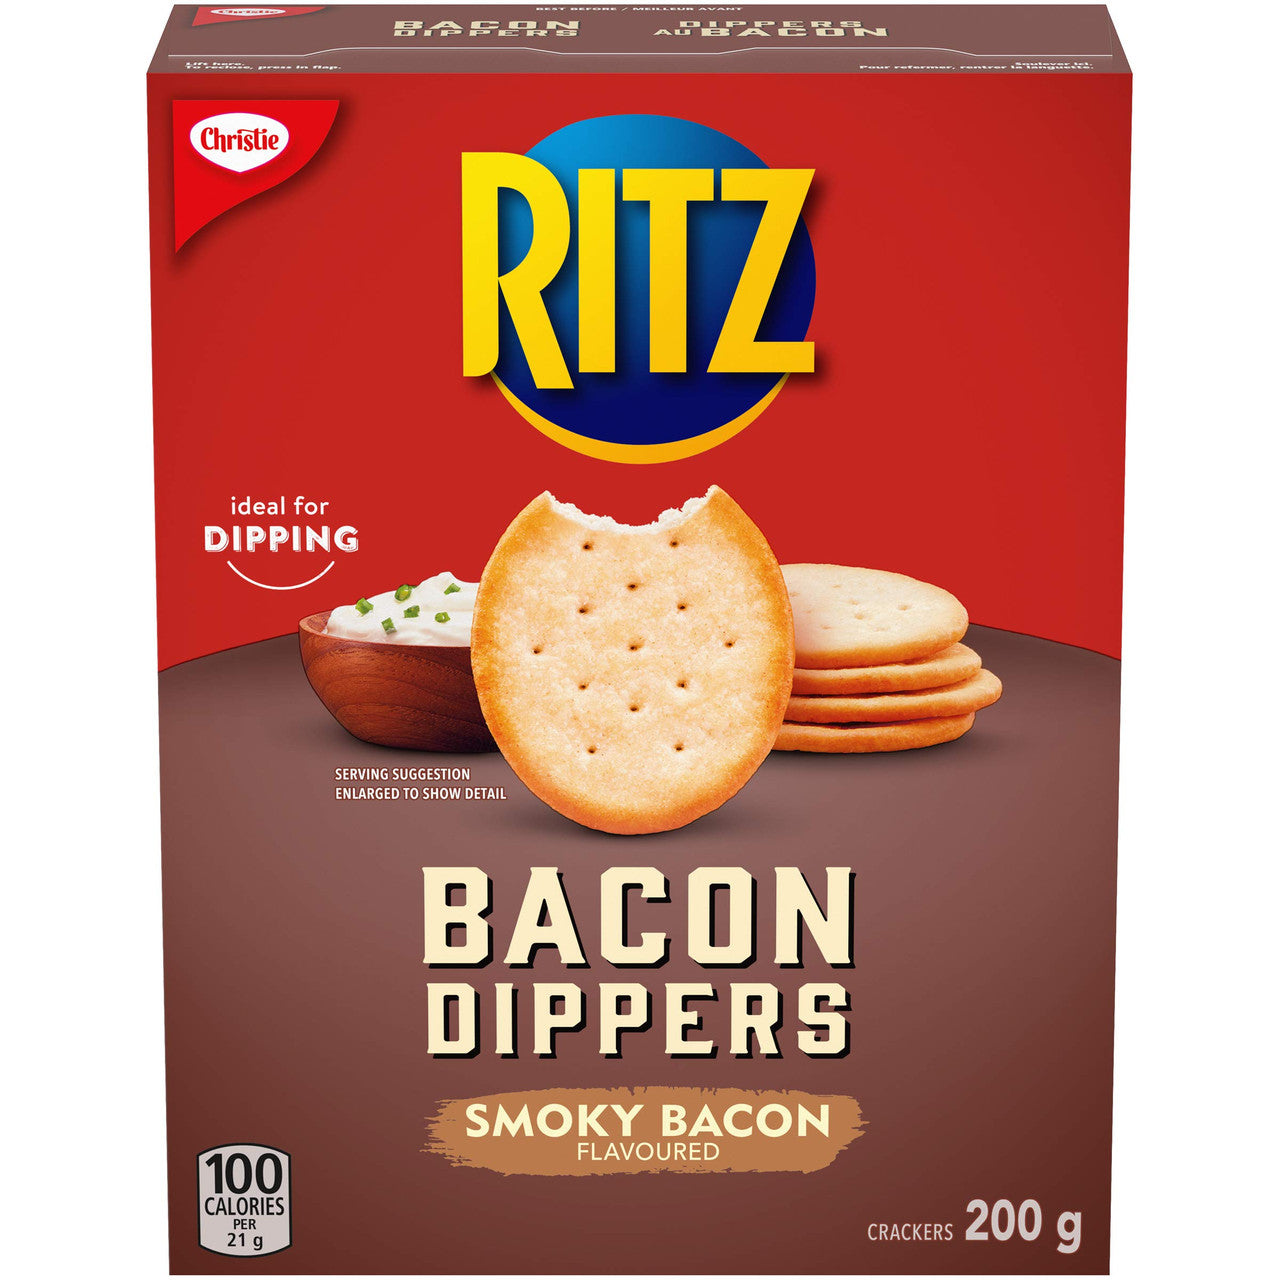 Christie Ritz Bacon Dippers Crackers, 200g/7.1 oz., (6 pack) {Imported from Canada}